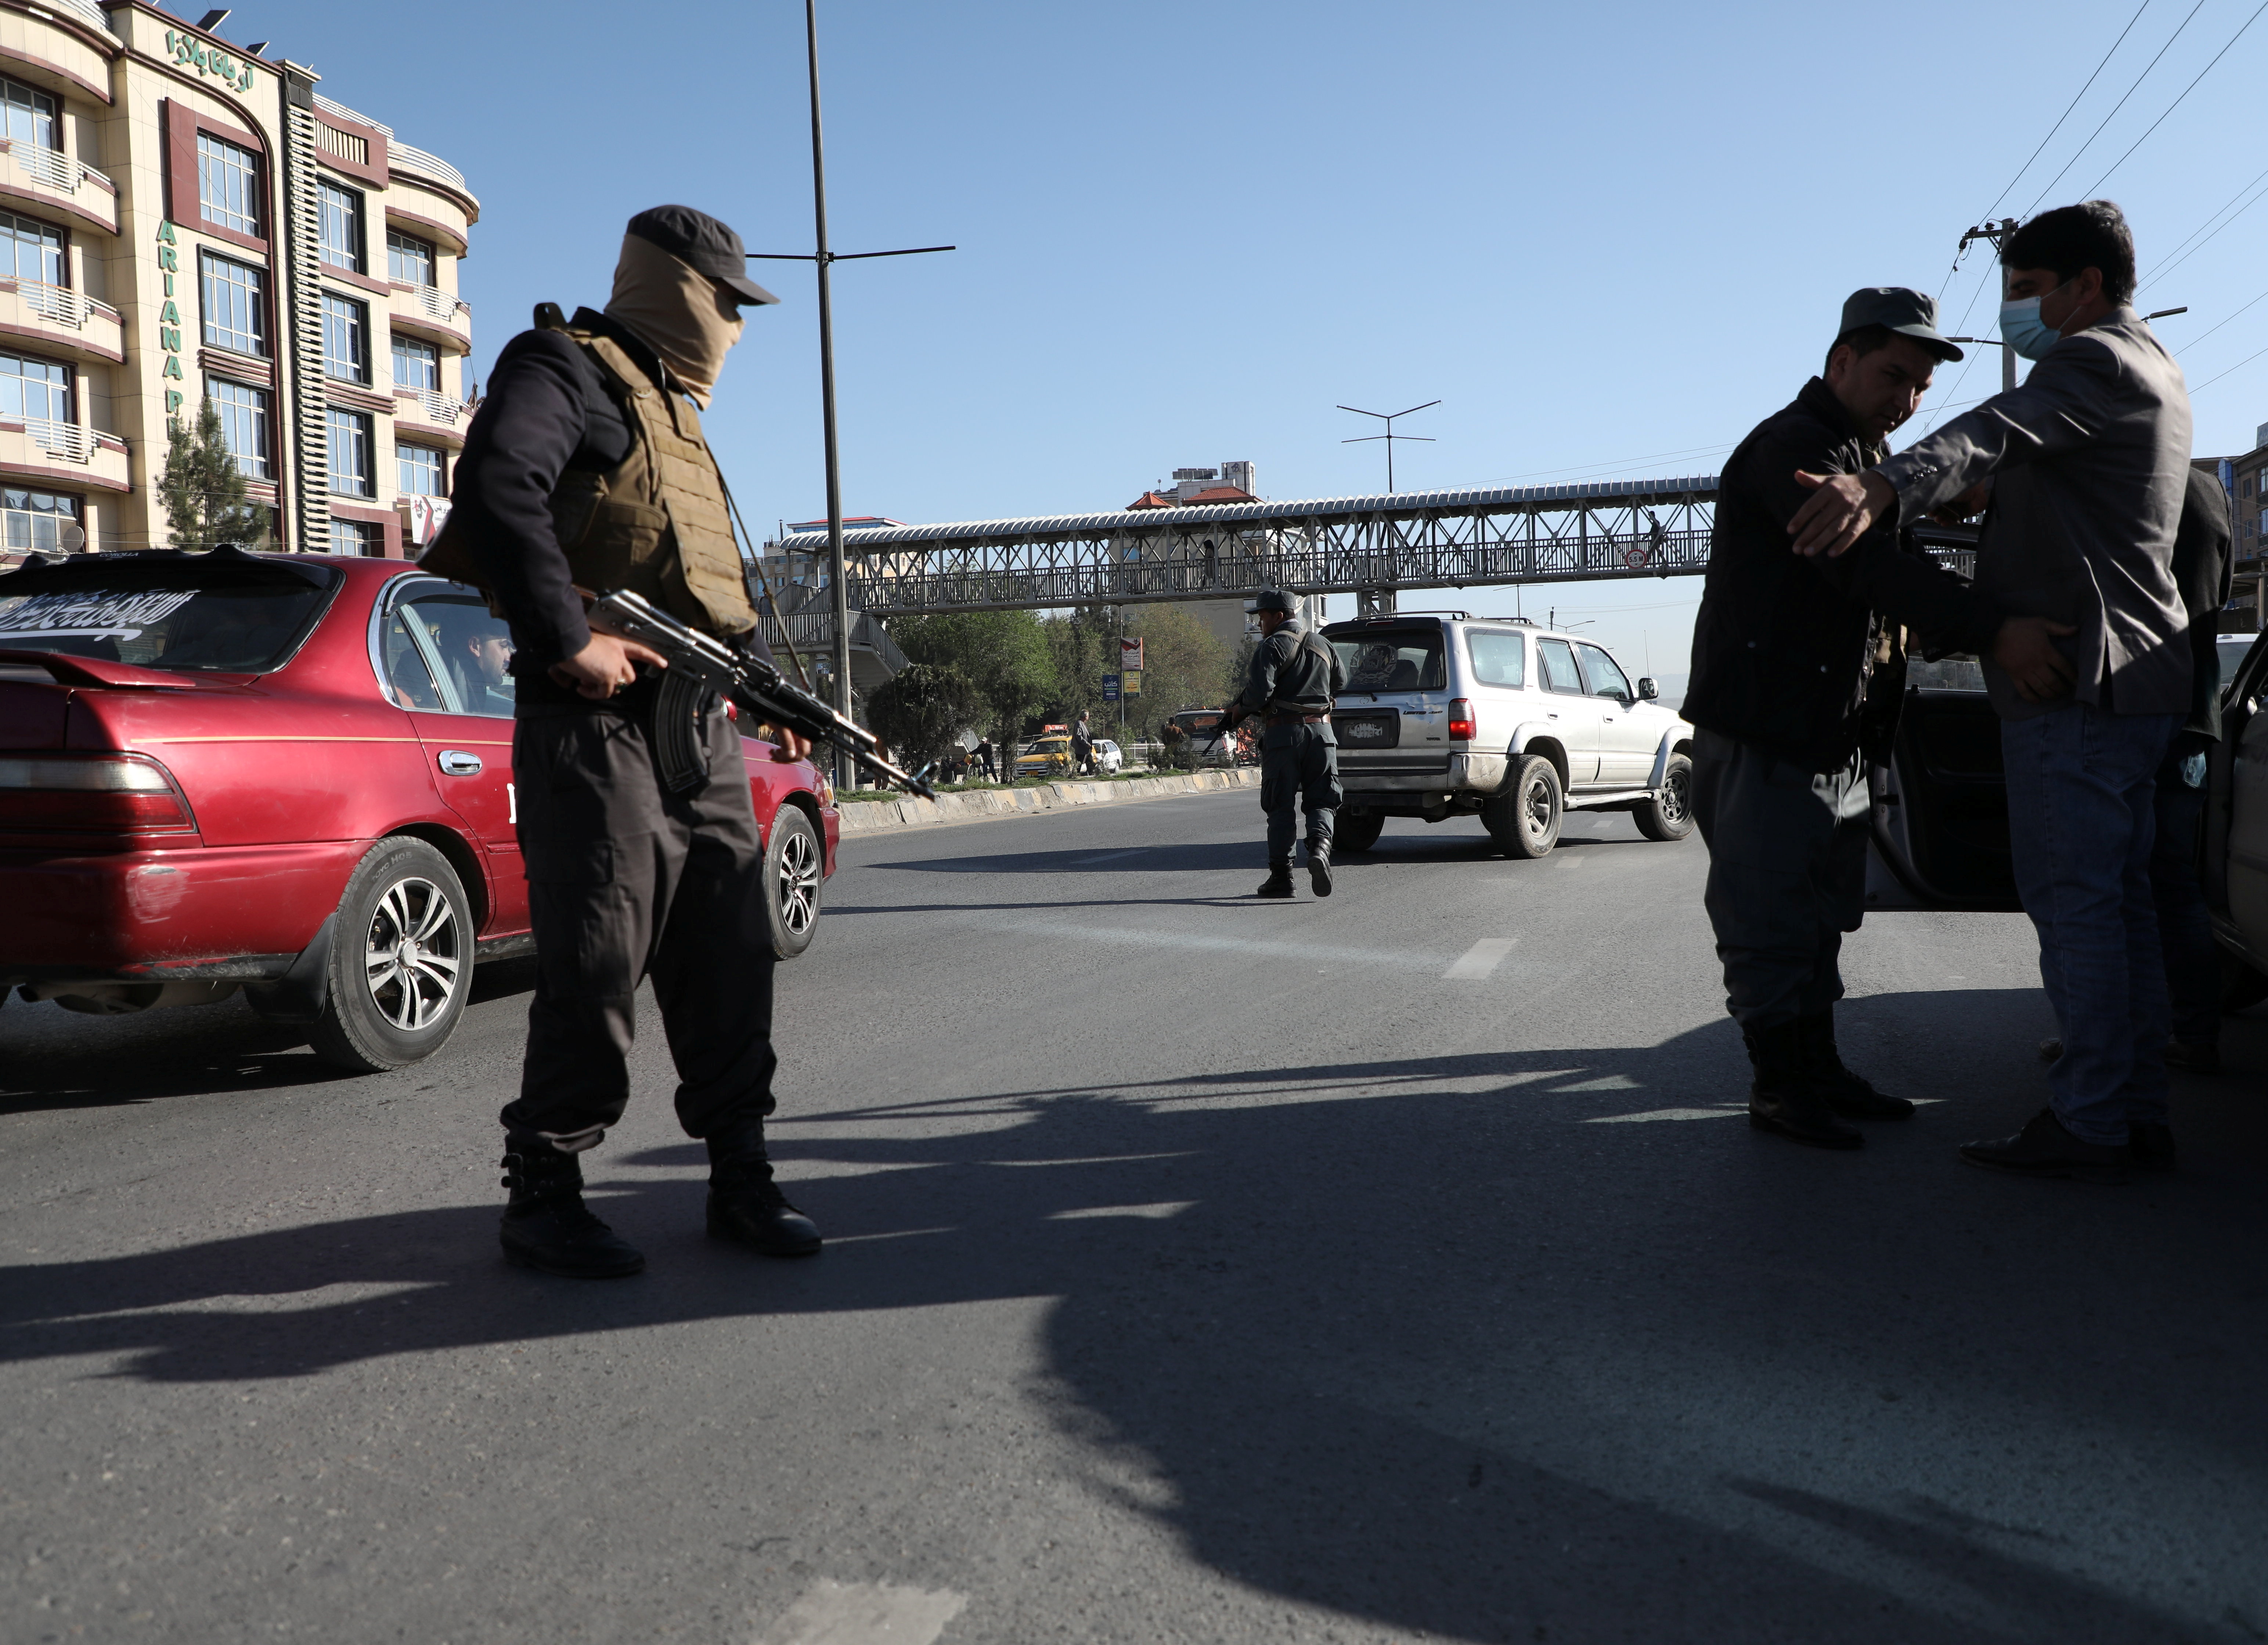 Afghan policemen keep watch at a checkpoint in Kabul, Afghanistan April 19, 2021 REUTERS/Omar Sobhani